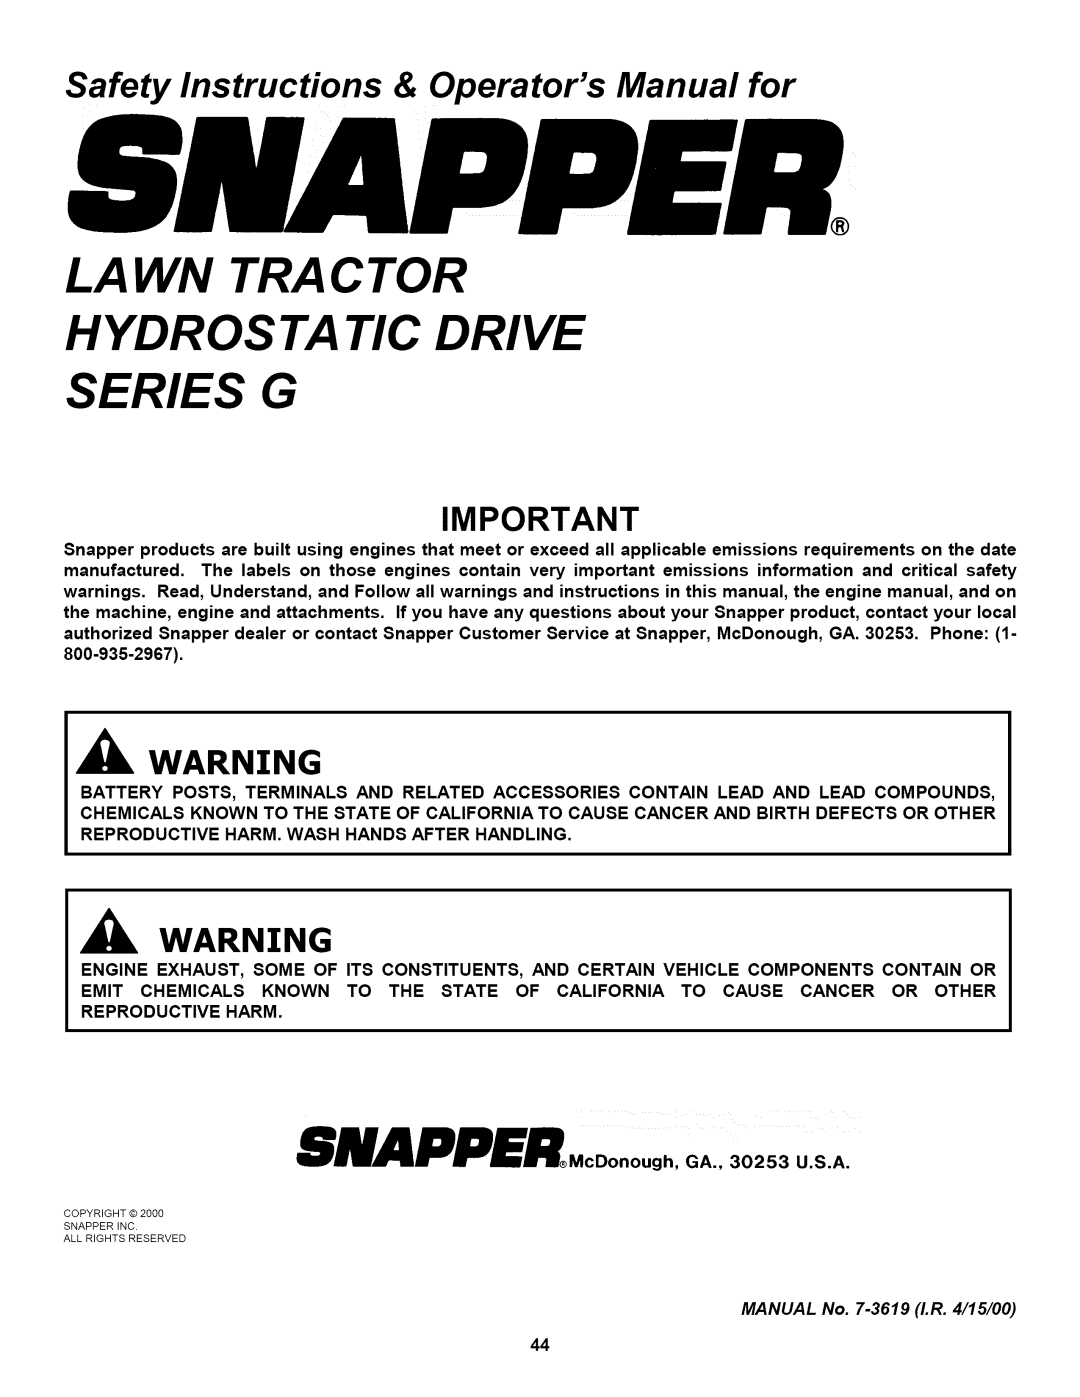 Snapper L T145H38GBV, L T150H38GKV, L T145H33GBV important safety instructions Lawn TRA C TOR Hydrosta TIC Drive Series G 